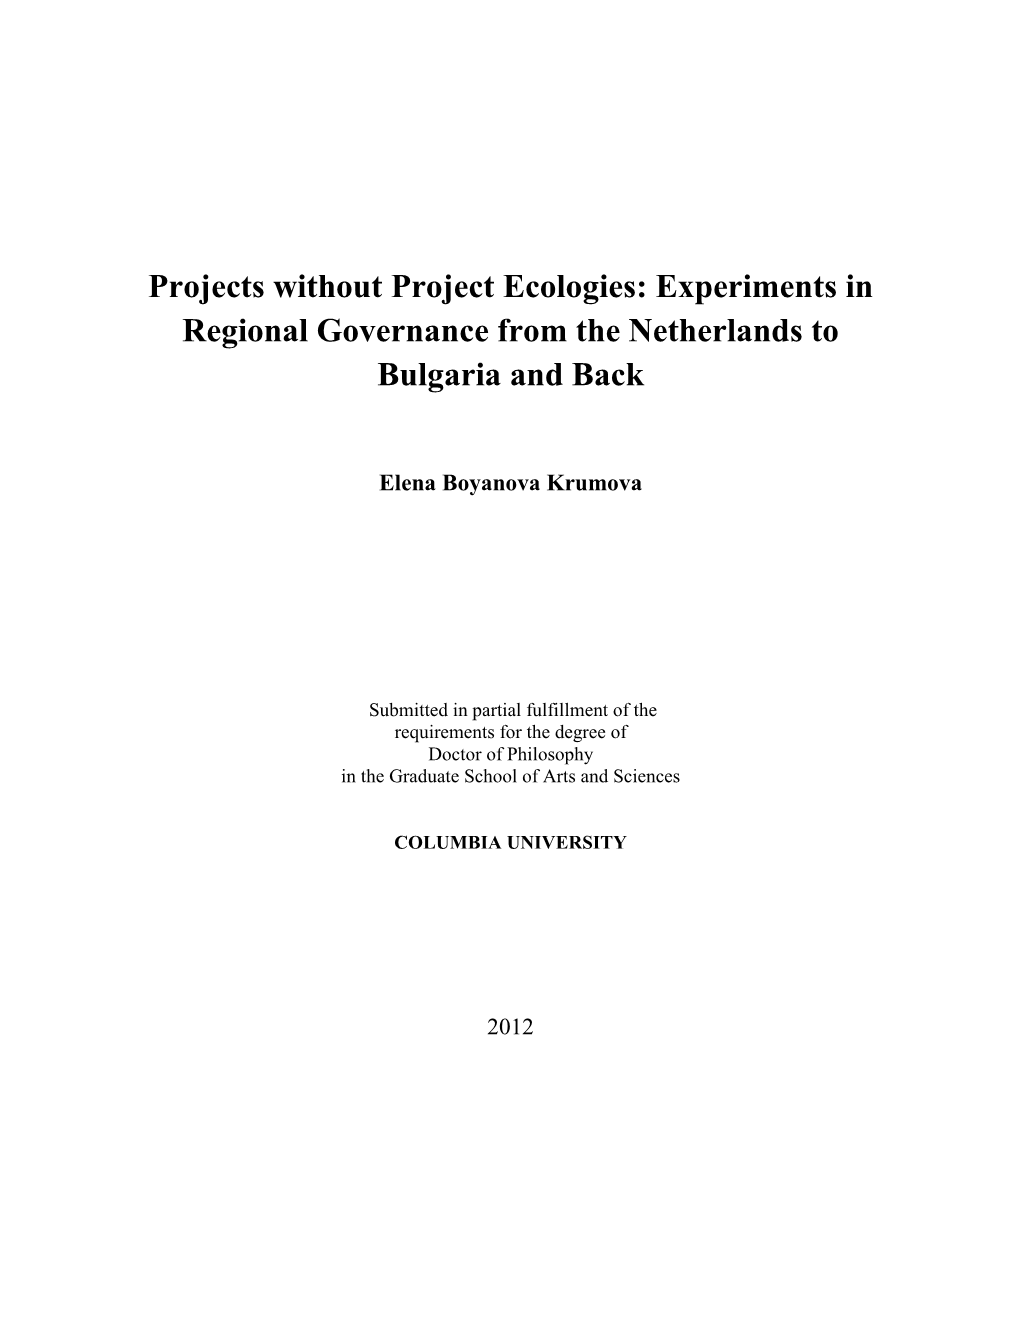 Projects Without Project Ecologies: Experiments in Regional Governance from the Netherlands to Bulgaria and Back